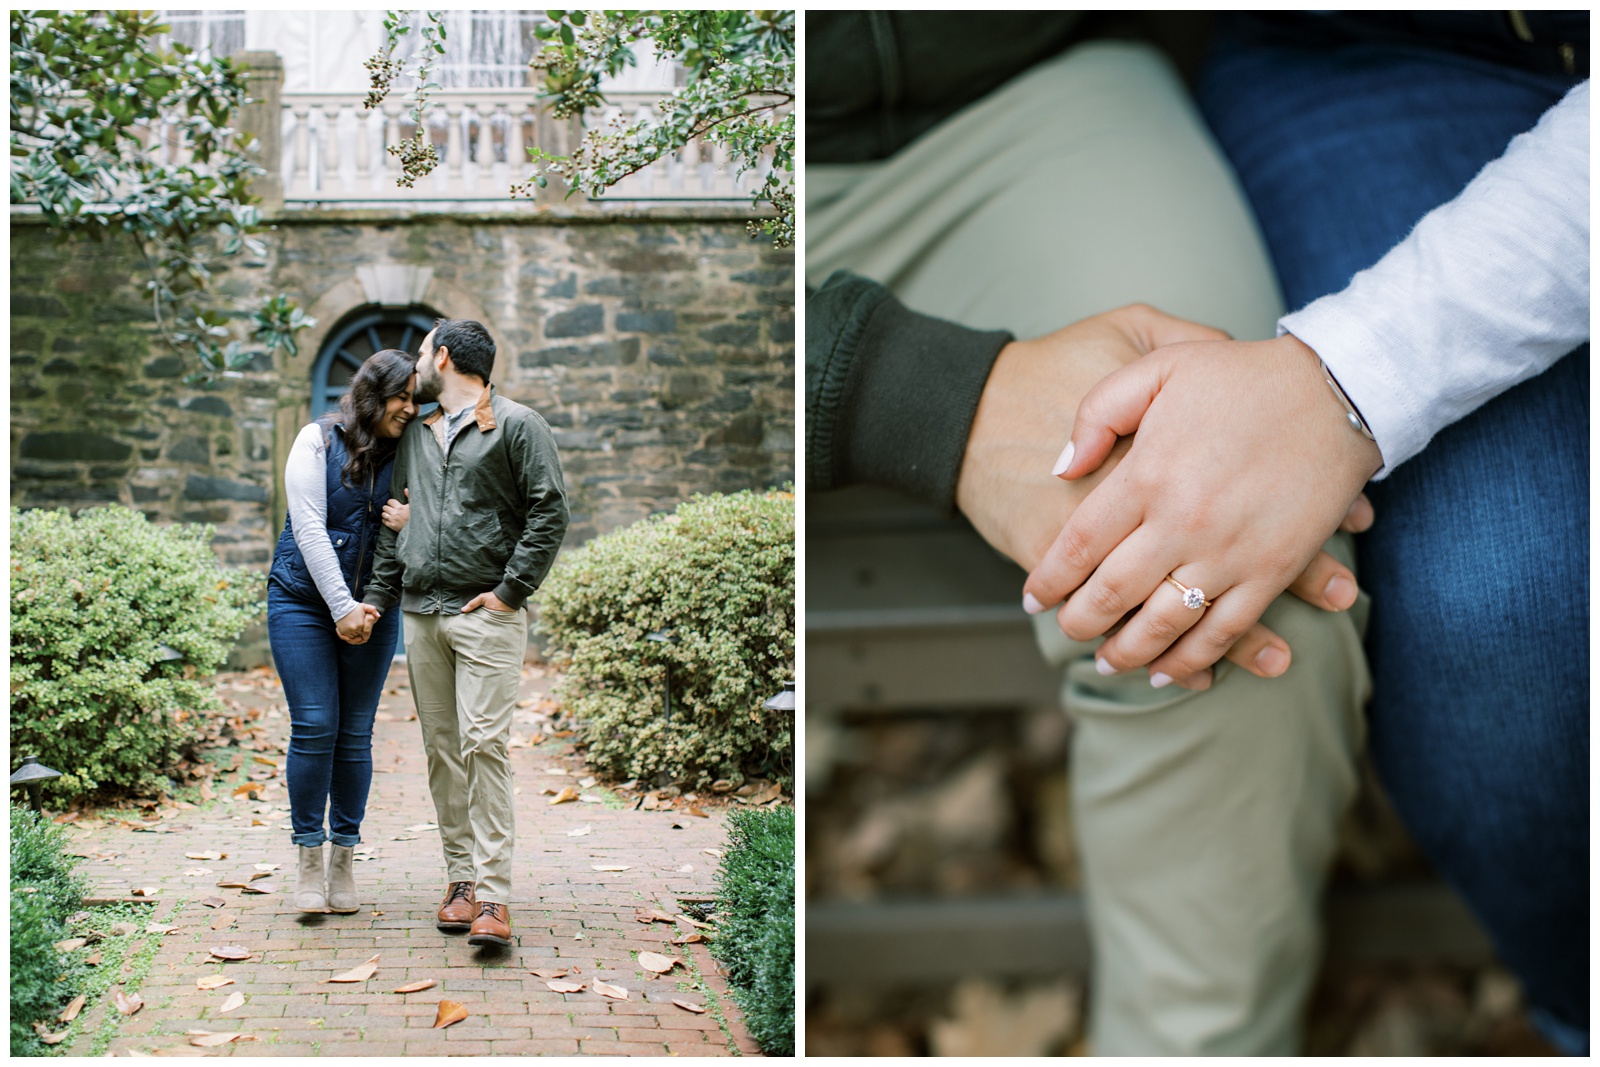 Why Rain Won't Ruin Your Engagement Session